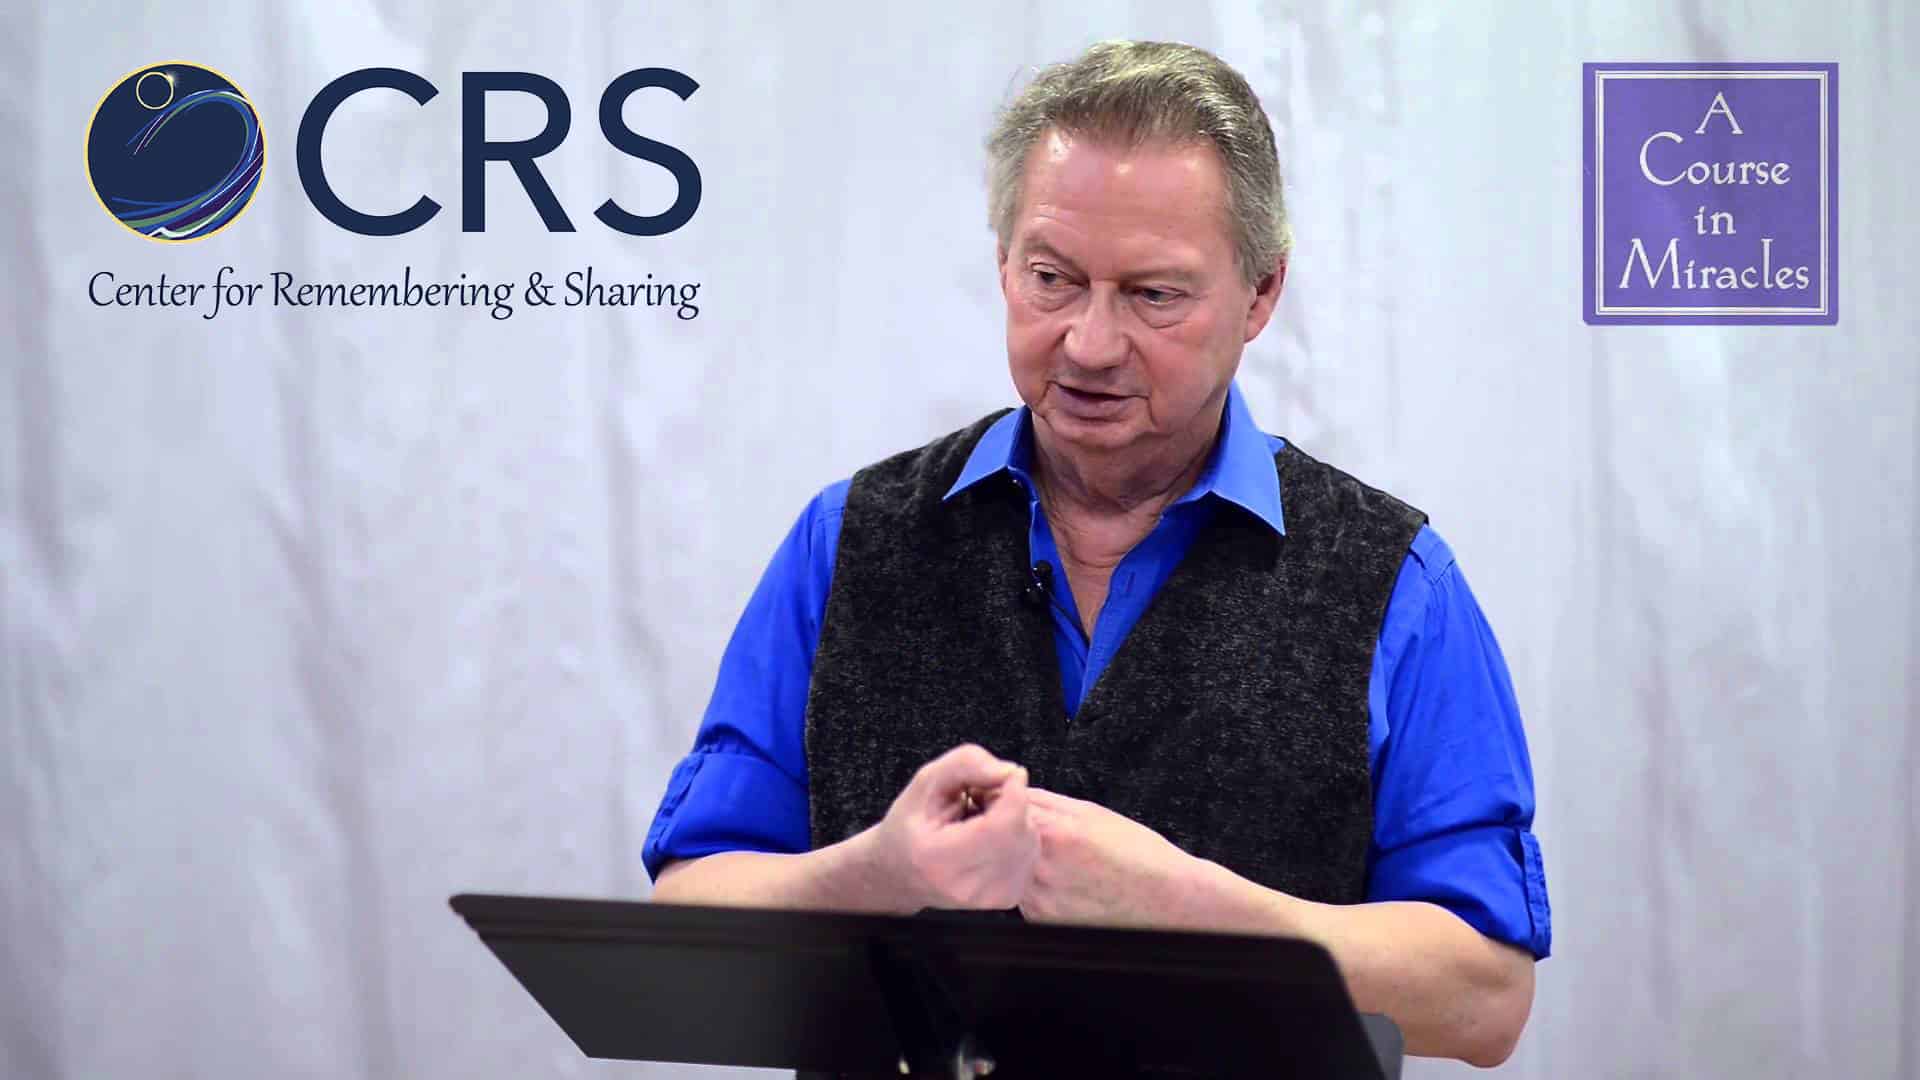 CRS Presents Miracles in Manhattan with Jon Mundy, Ph.D.